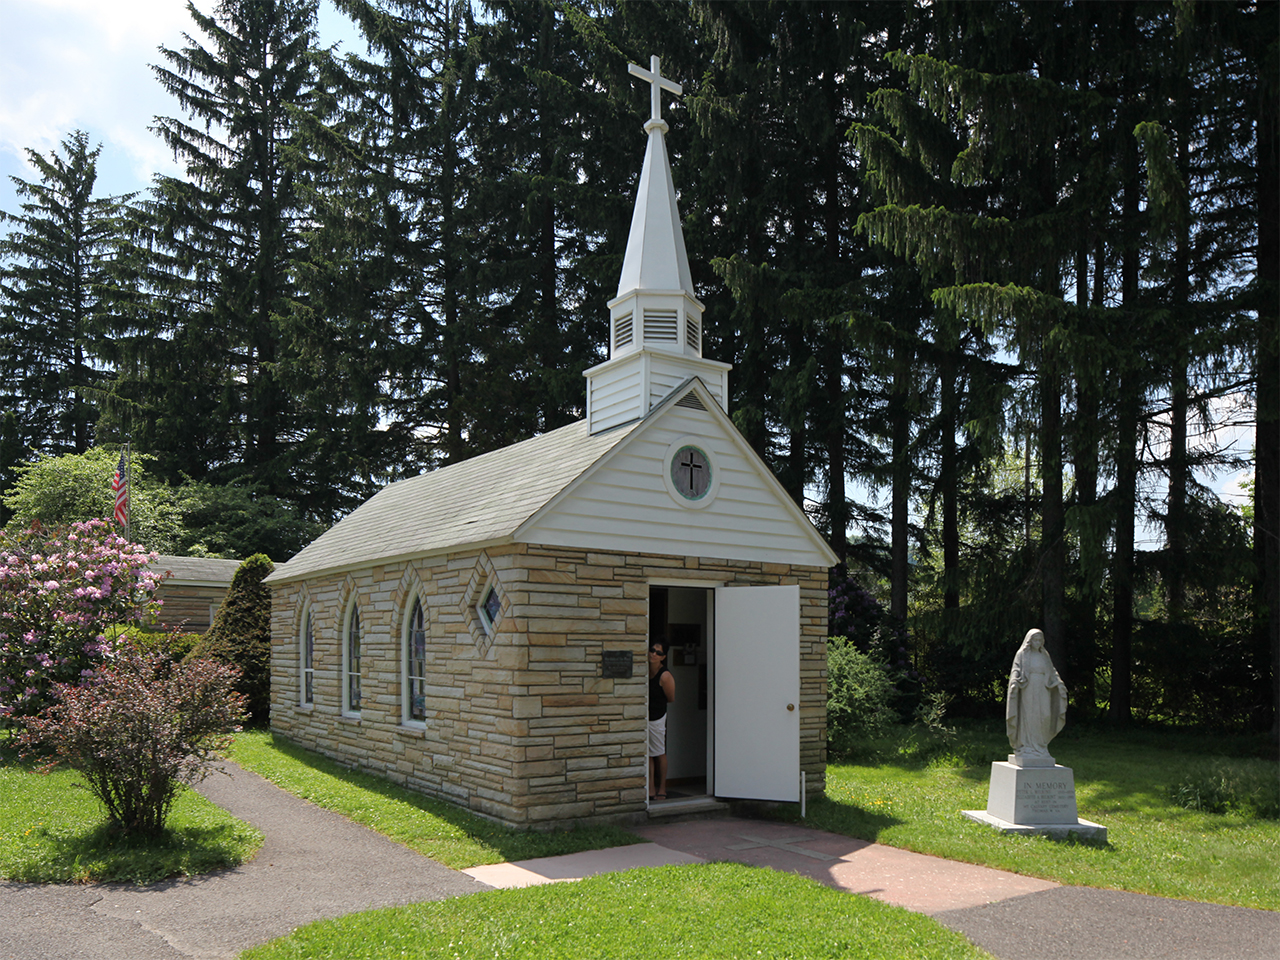 Our Lady of the Pines, Smallest Church in 48 States